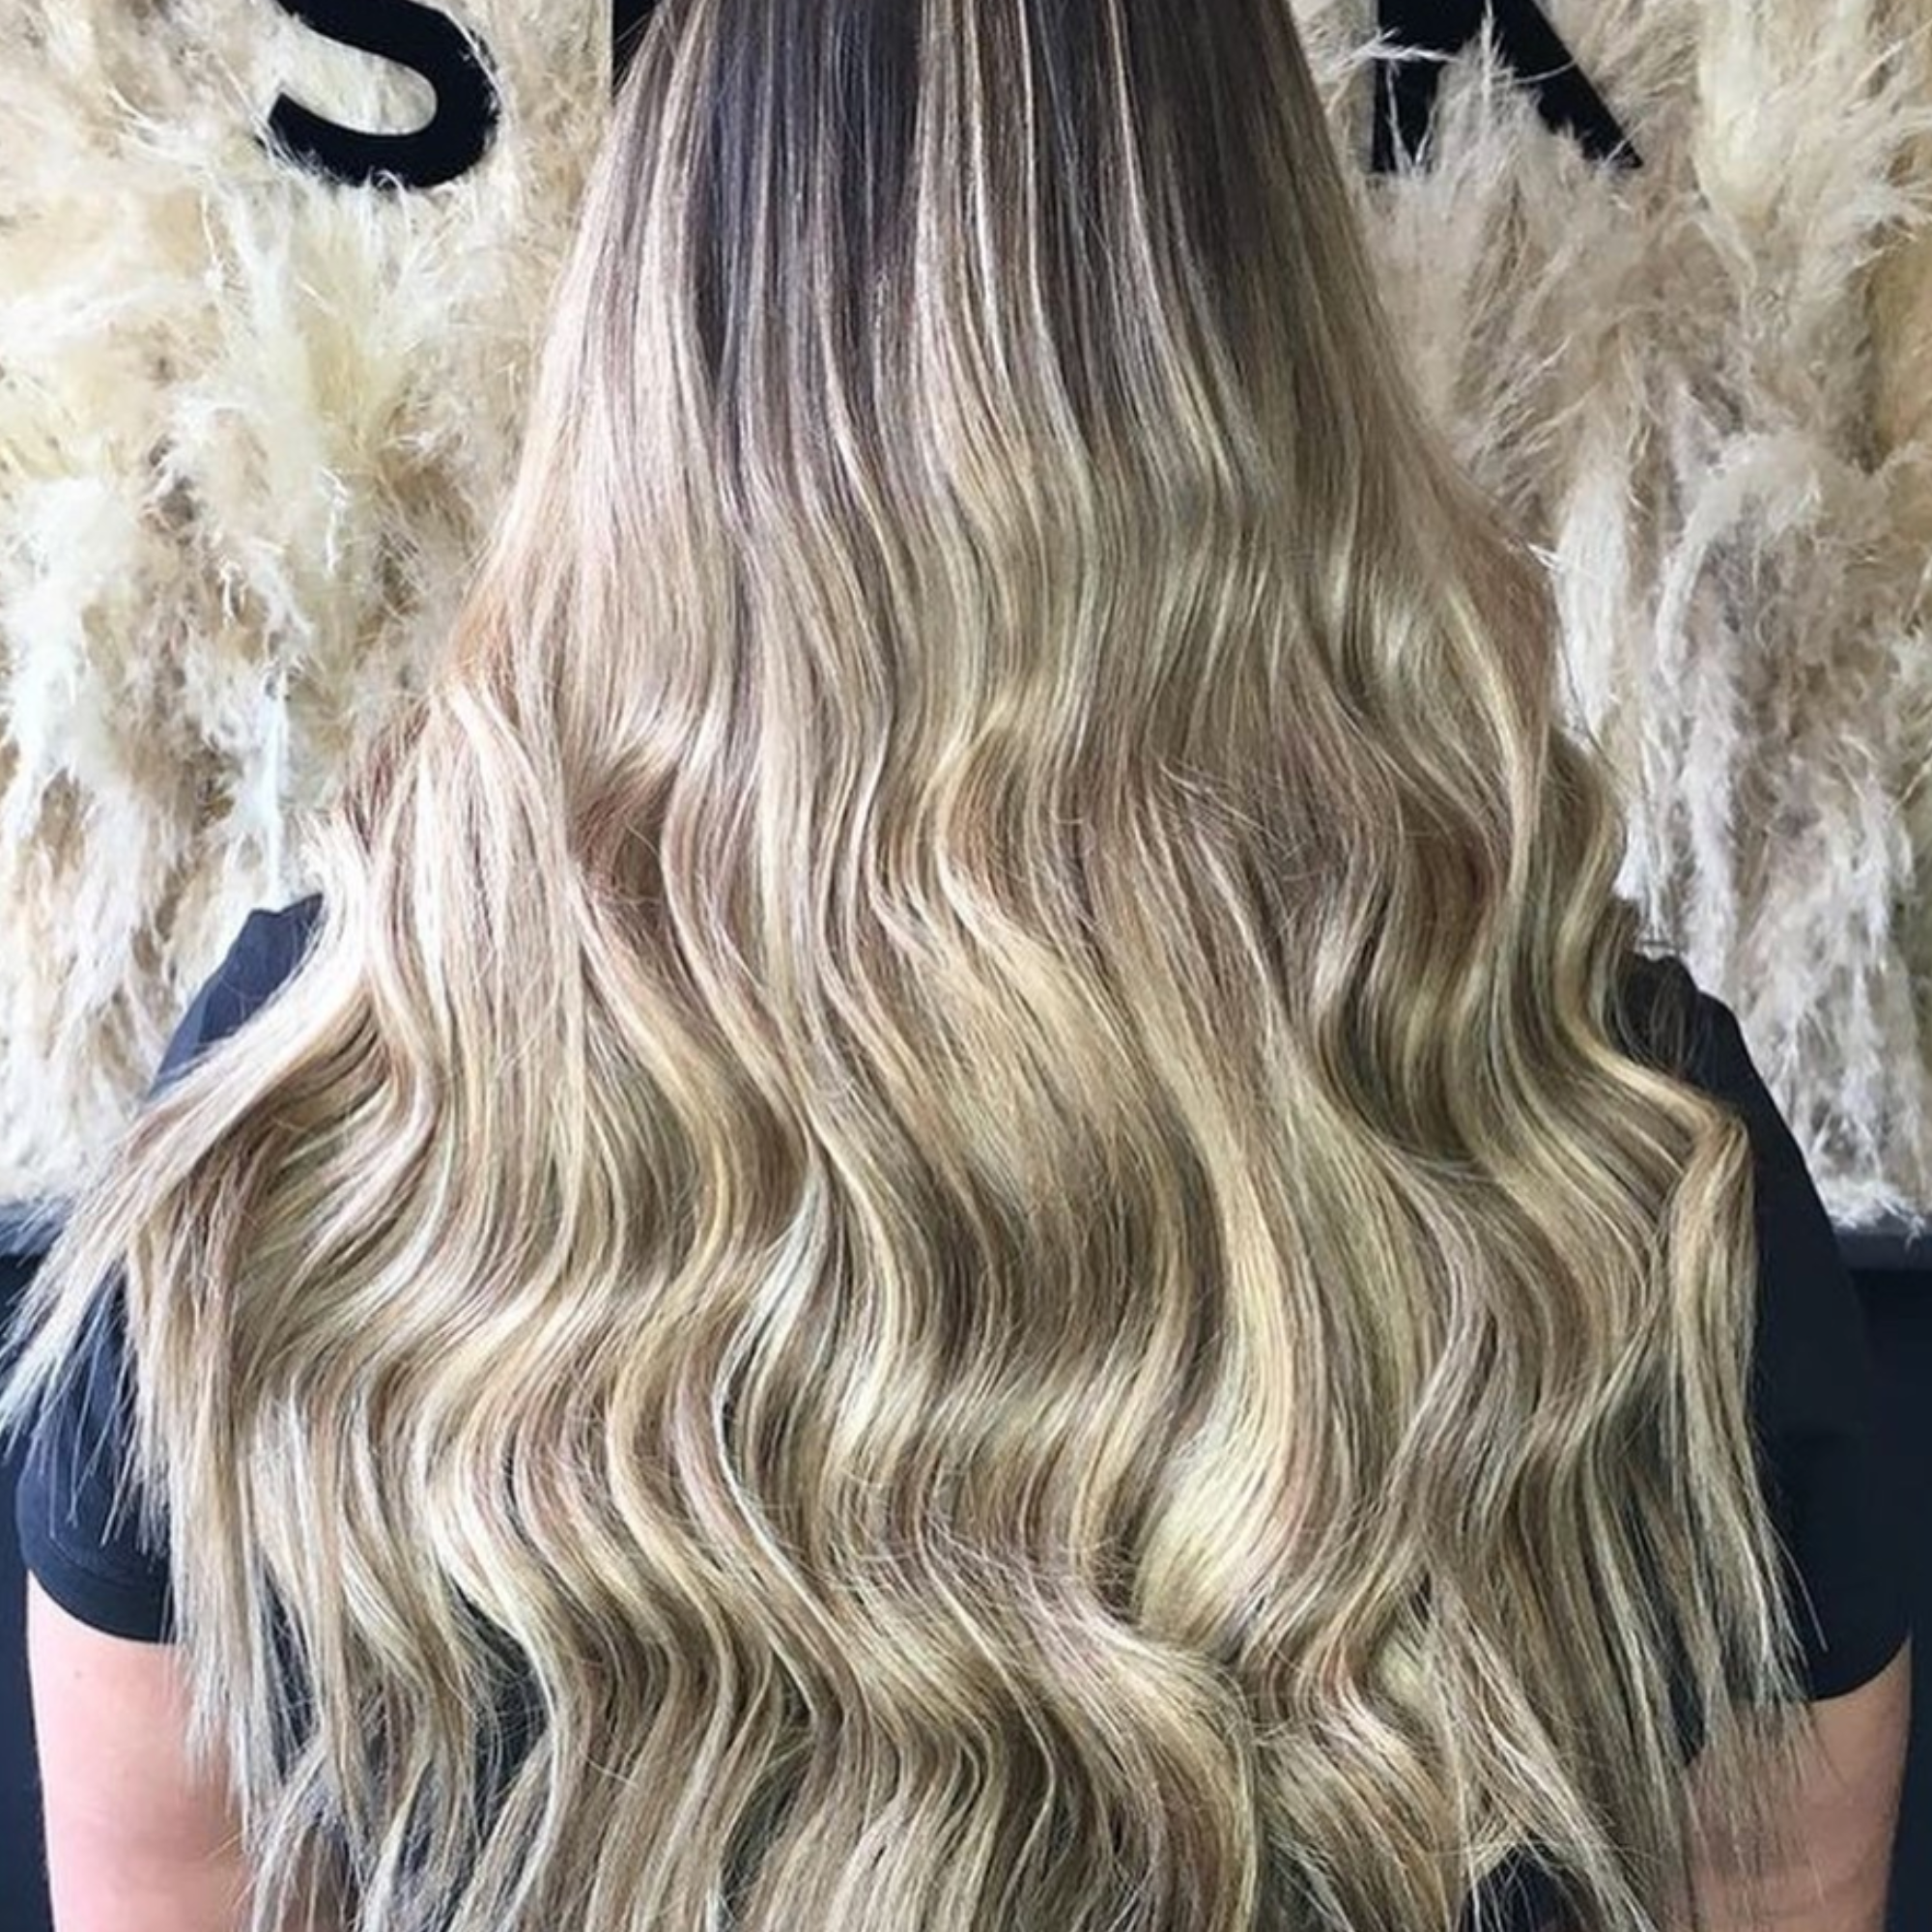 22" Prebonded Extensions Rooted Coachella